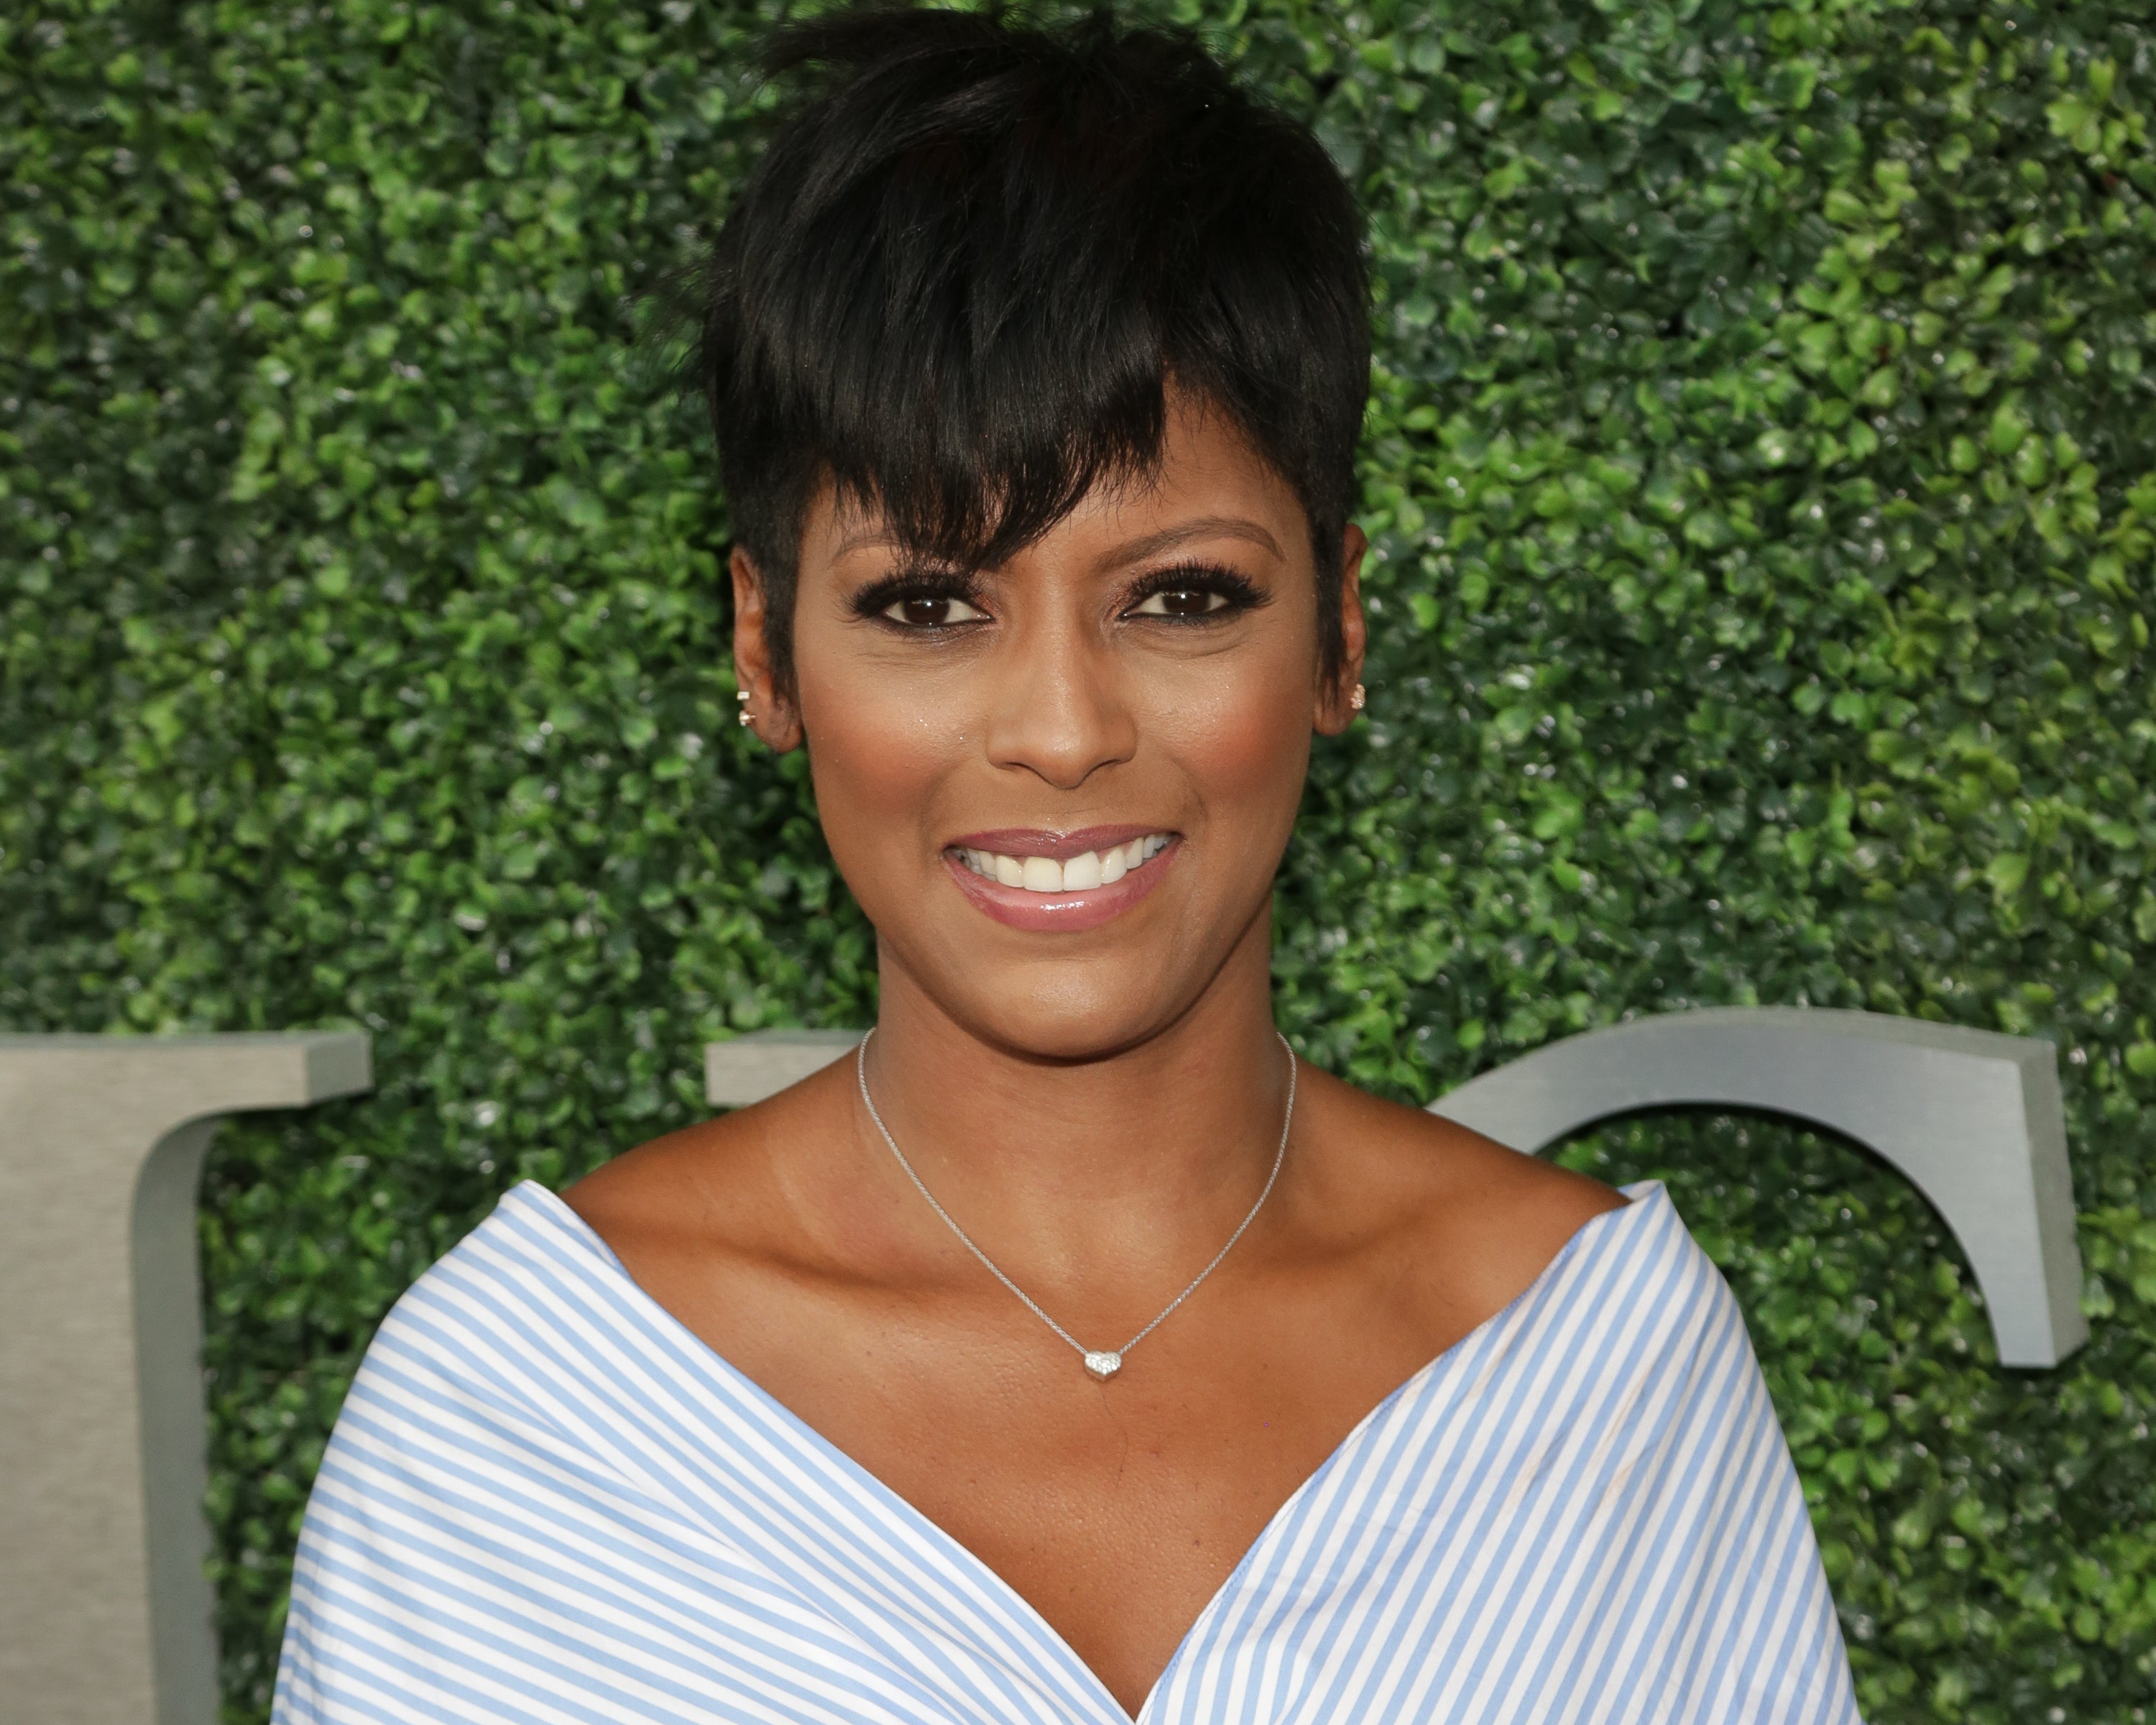 Tamron Hall Lands Daytime Talk Show 5 Months After 'Today' Exit
